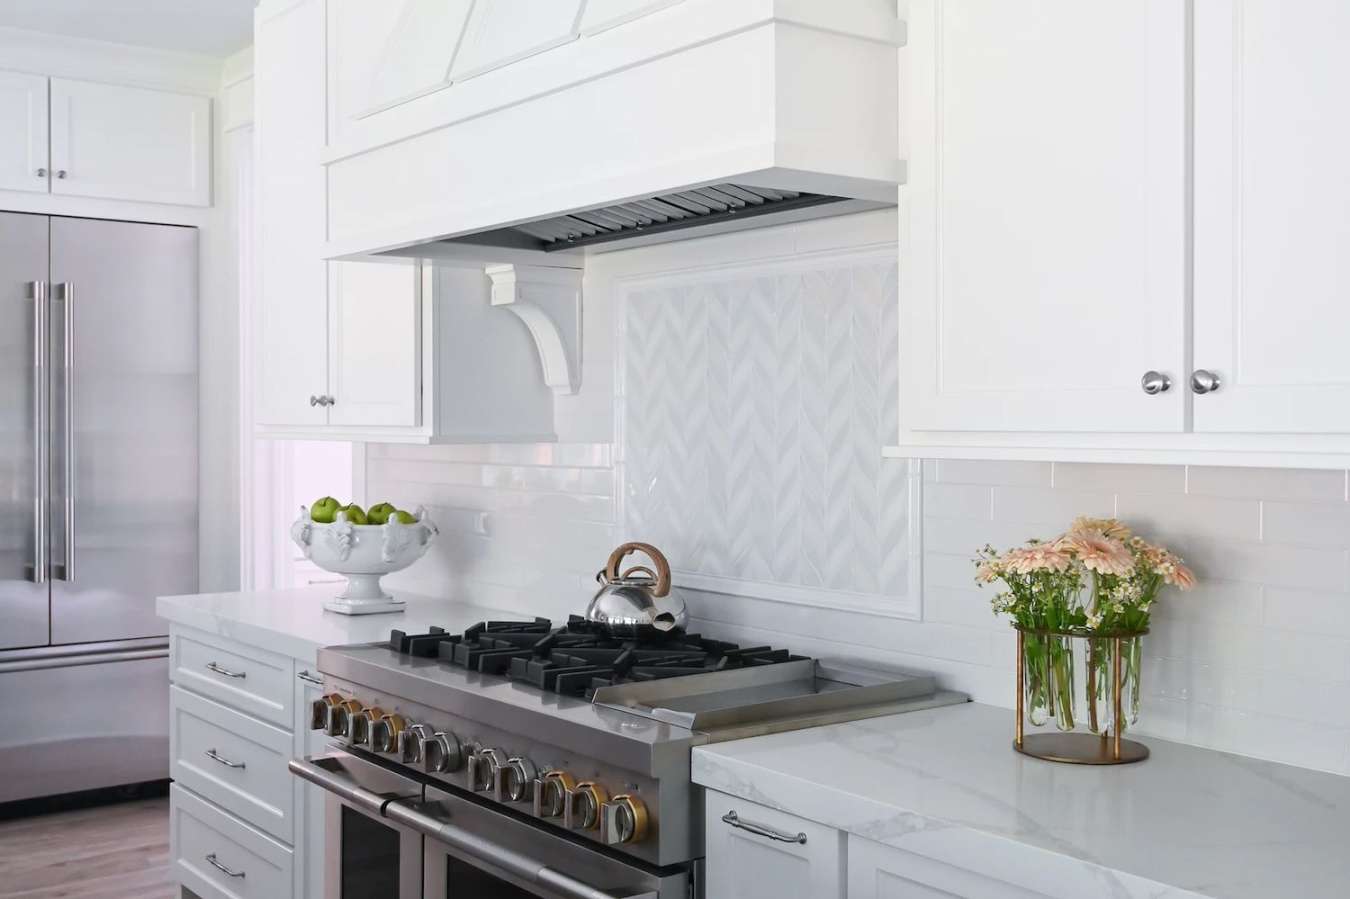 Kitchen Backsplash Ideas for Every Style and Budget